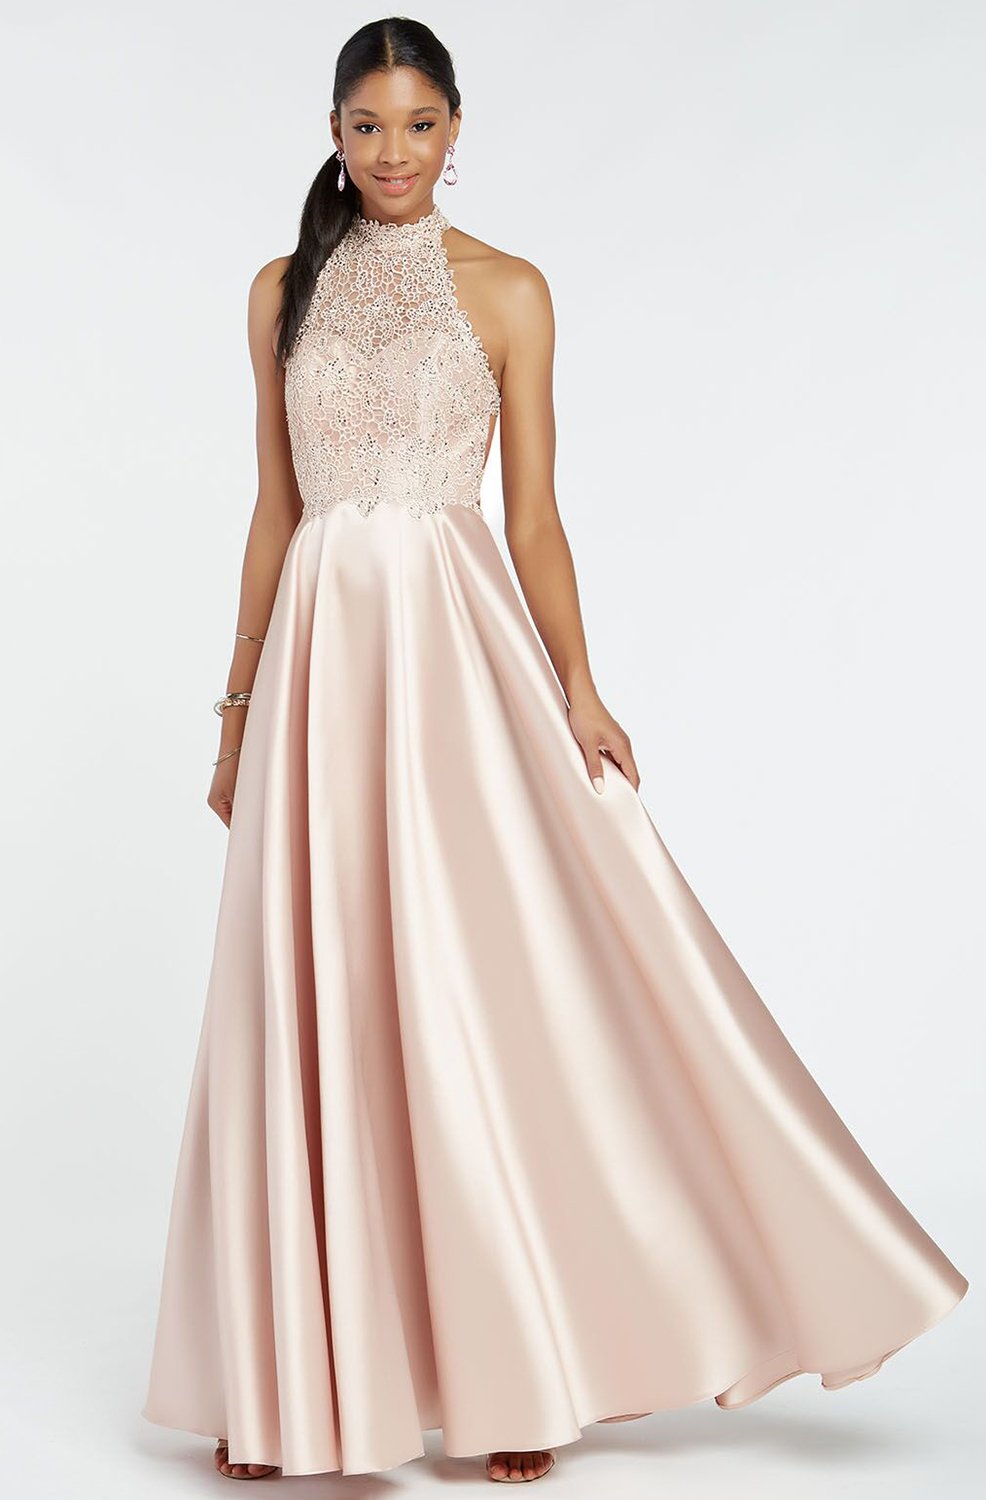 Alyce Paris - 60331 Halter Lace Appliqued Mikado Racerback Prom Gown In Pink